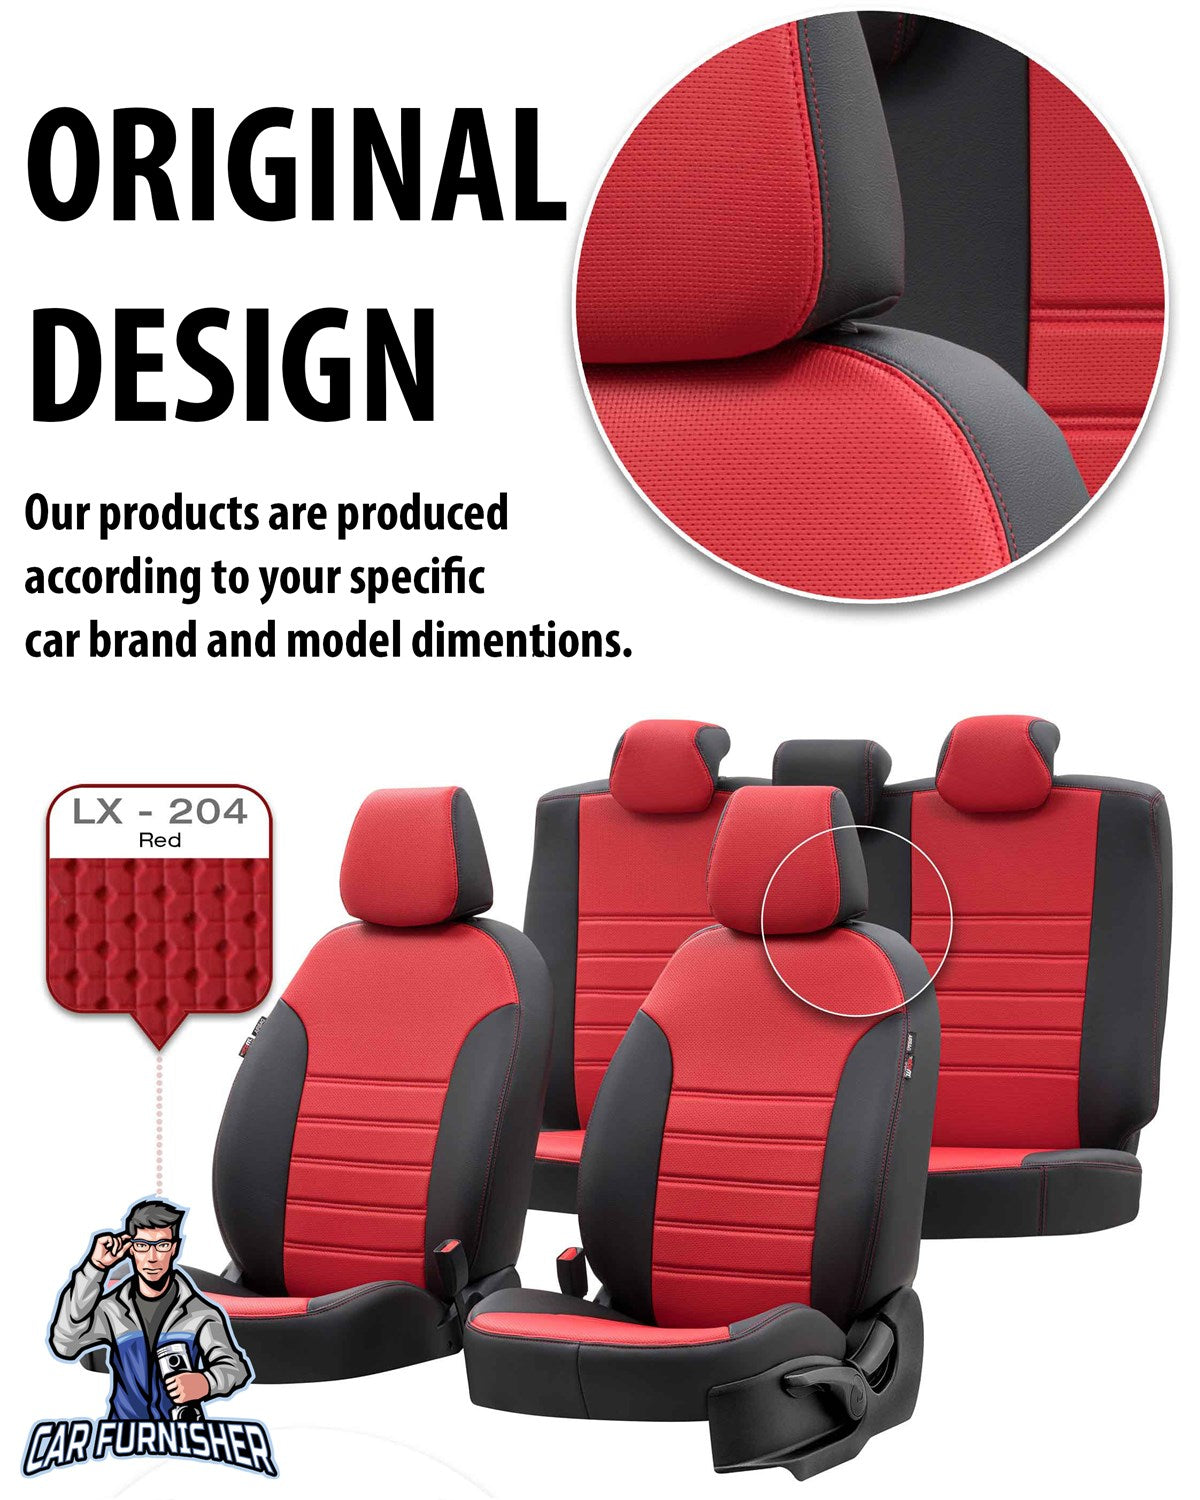 Chevrolet Captiva Seat Cover New York Leather Design Smoked Leather